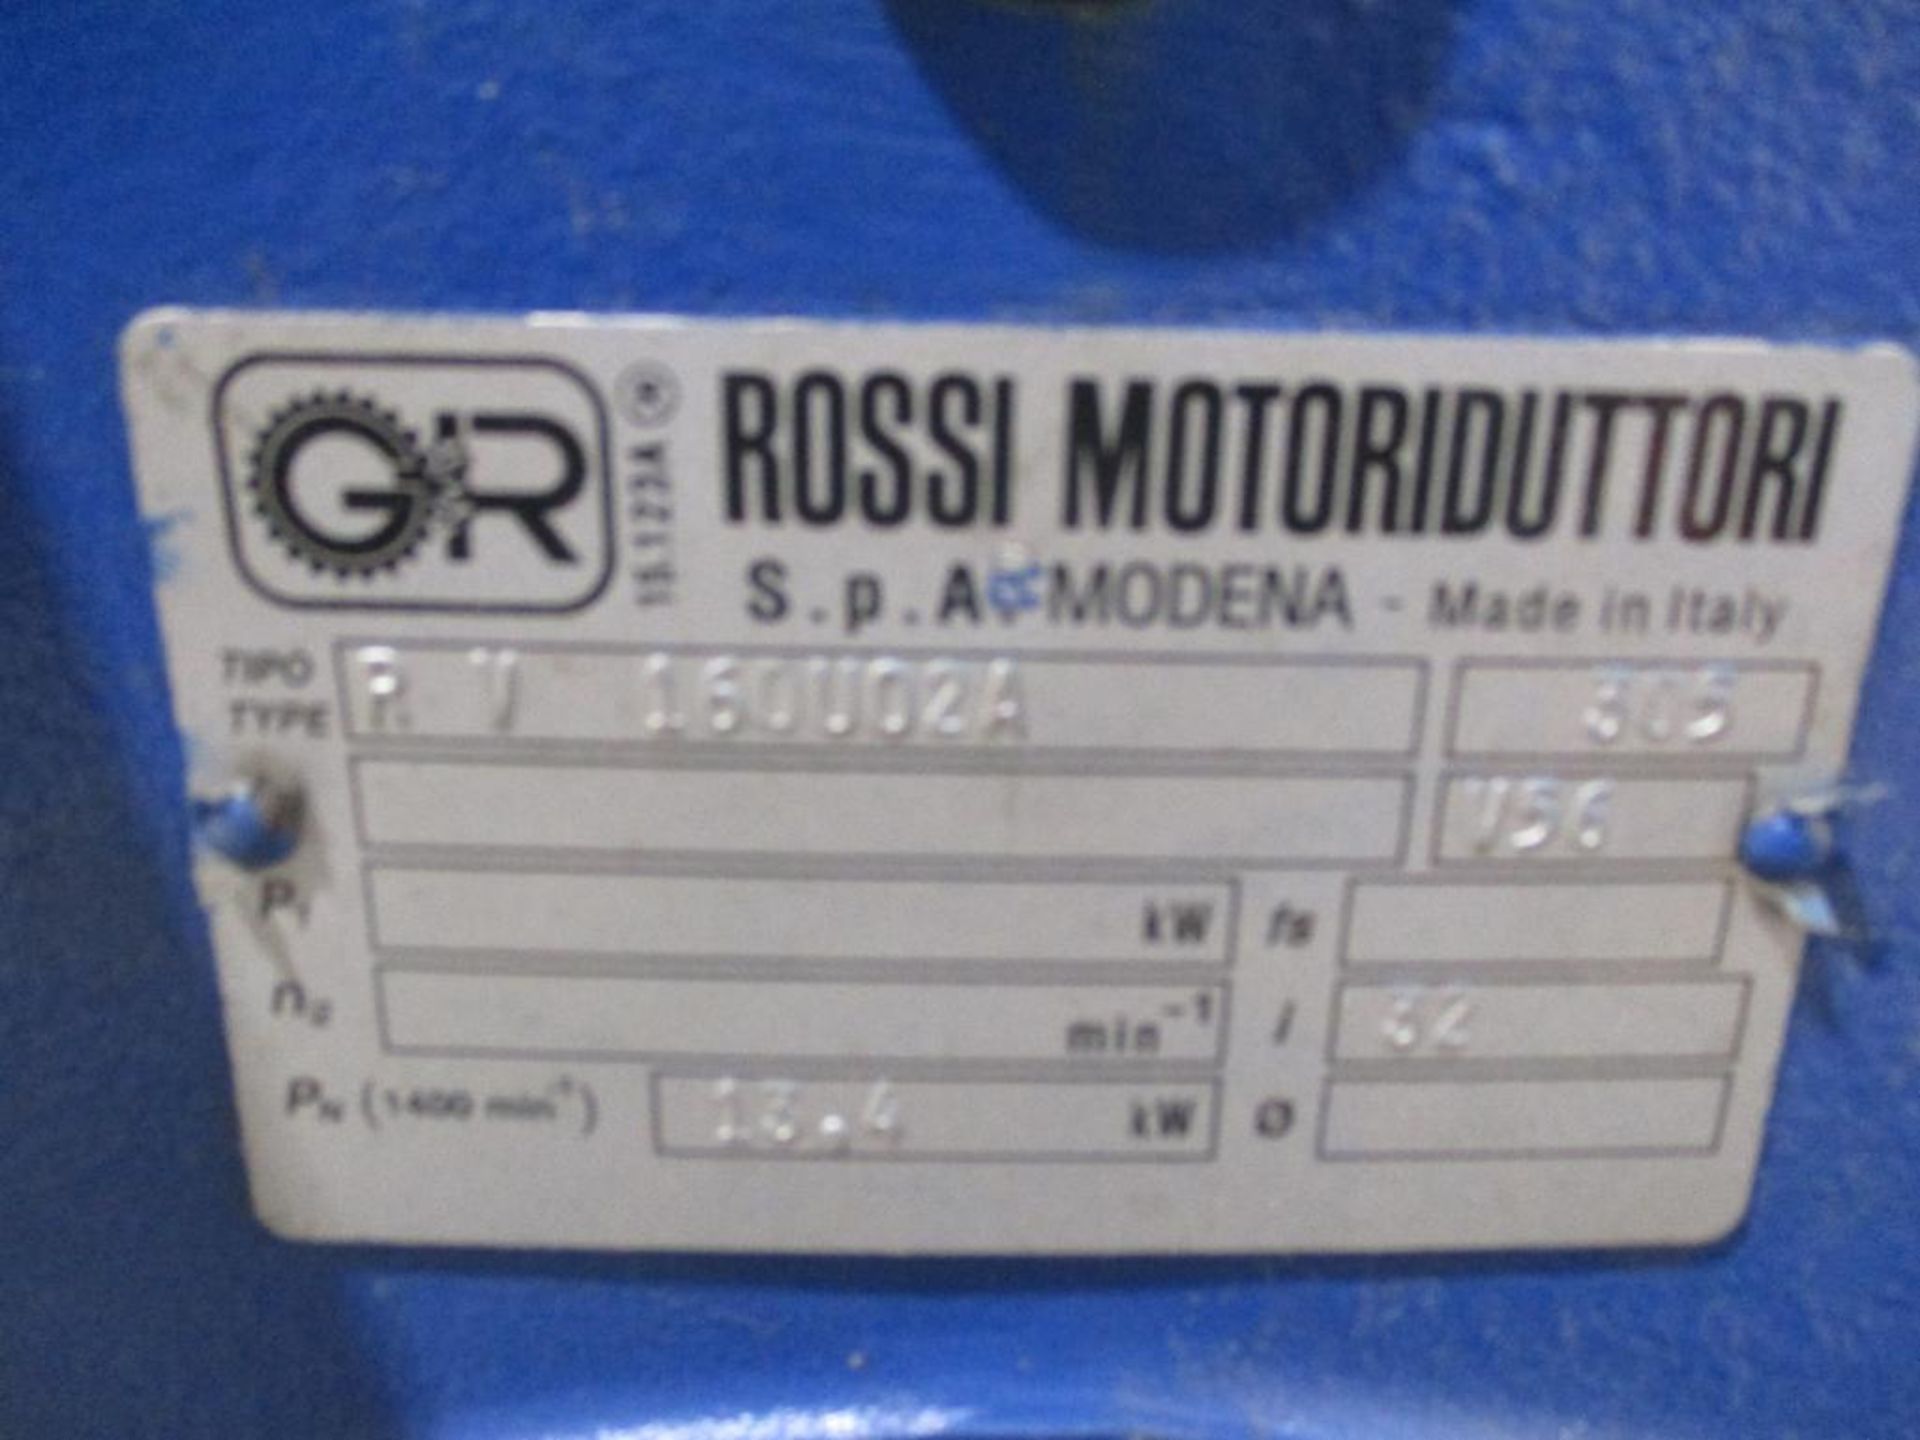 ROSSI MOTORIDUTTORI 32 RATIO REDUCER P/N RV160U02A, 279# lbs (There will be a $40 Rigging/Prep fee a - Image 5 of 5